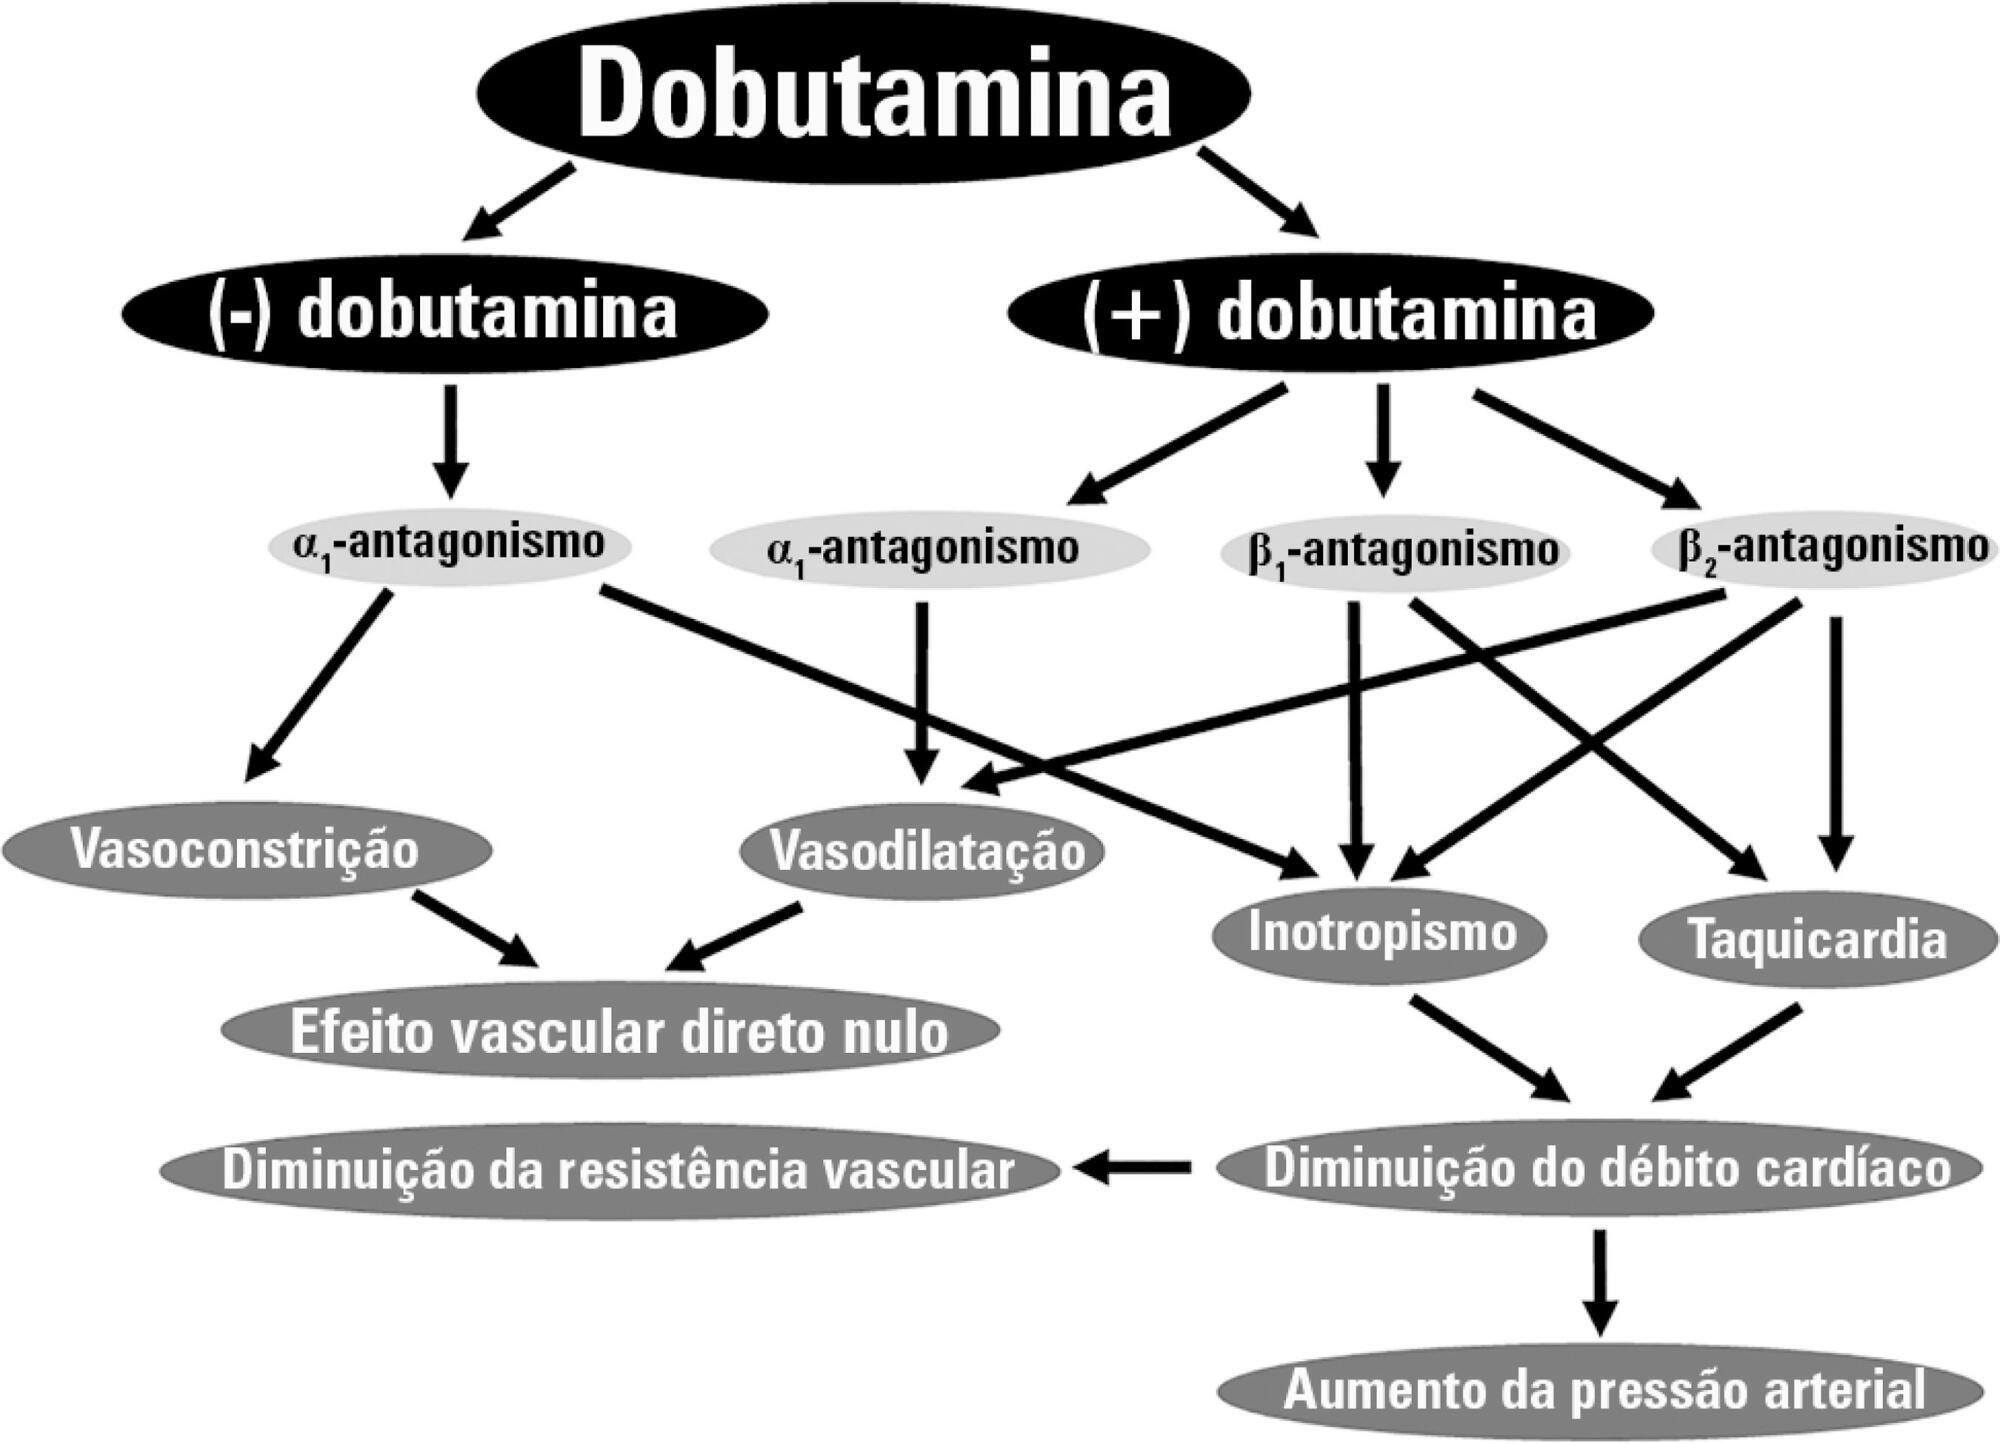 The spectrum of cardiovascular effects of dobutamine – from healthy subjects to septic shock patients